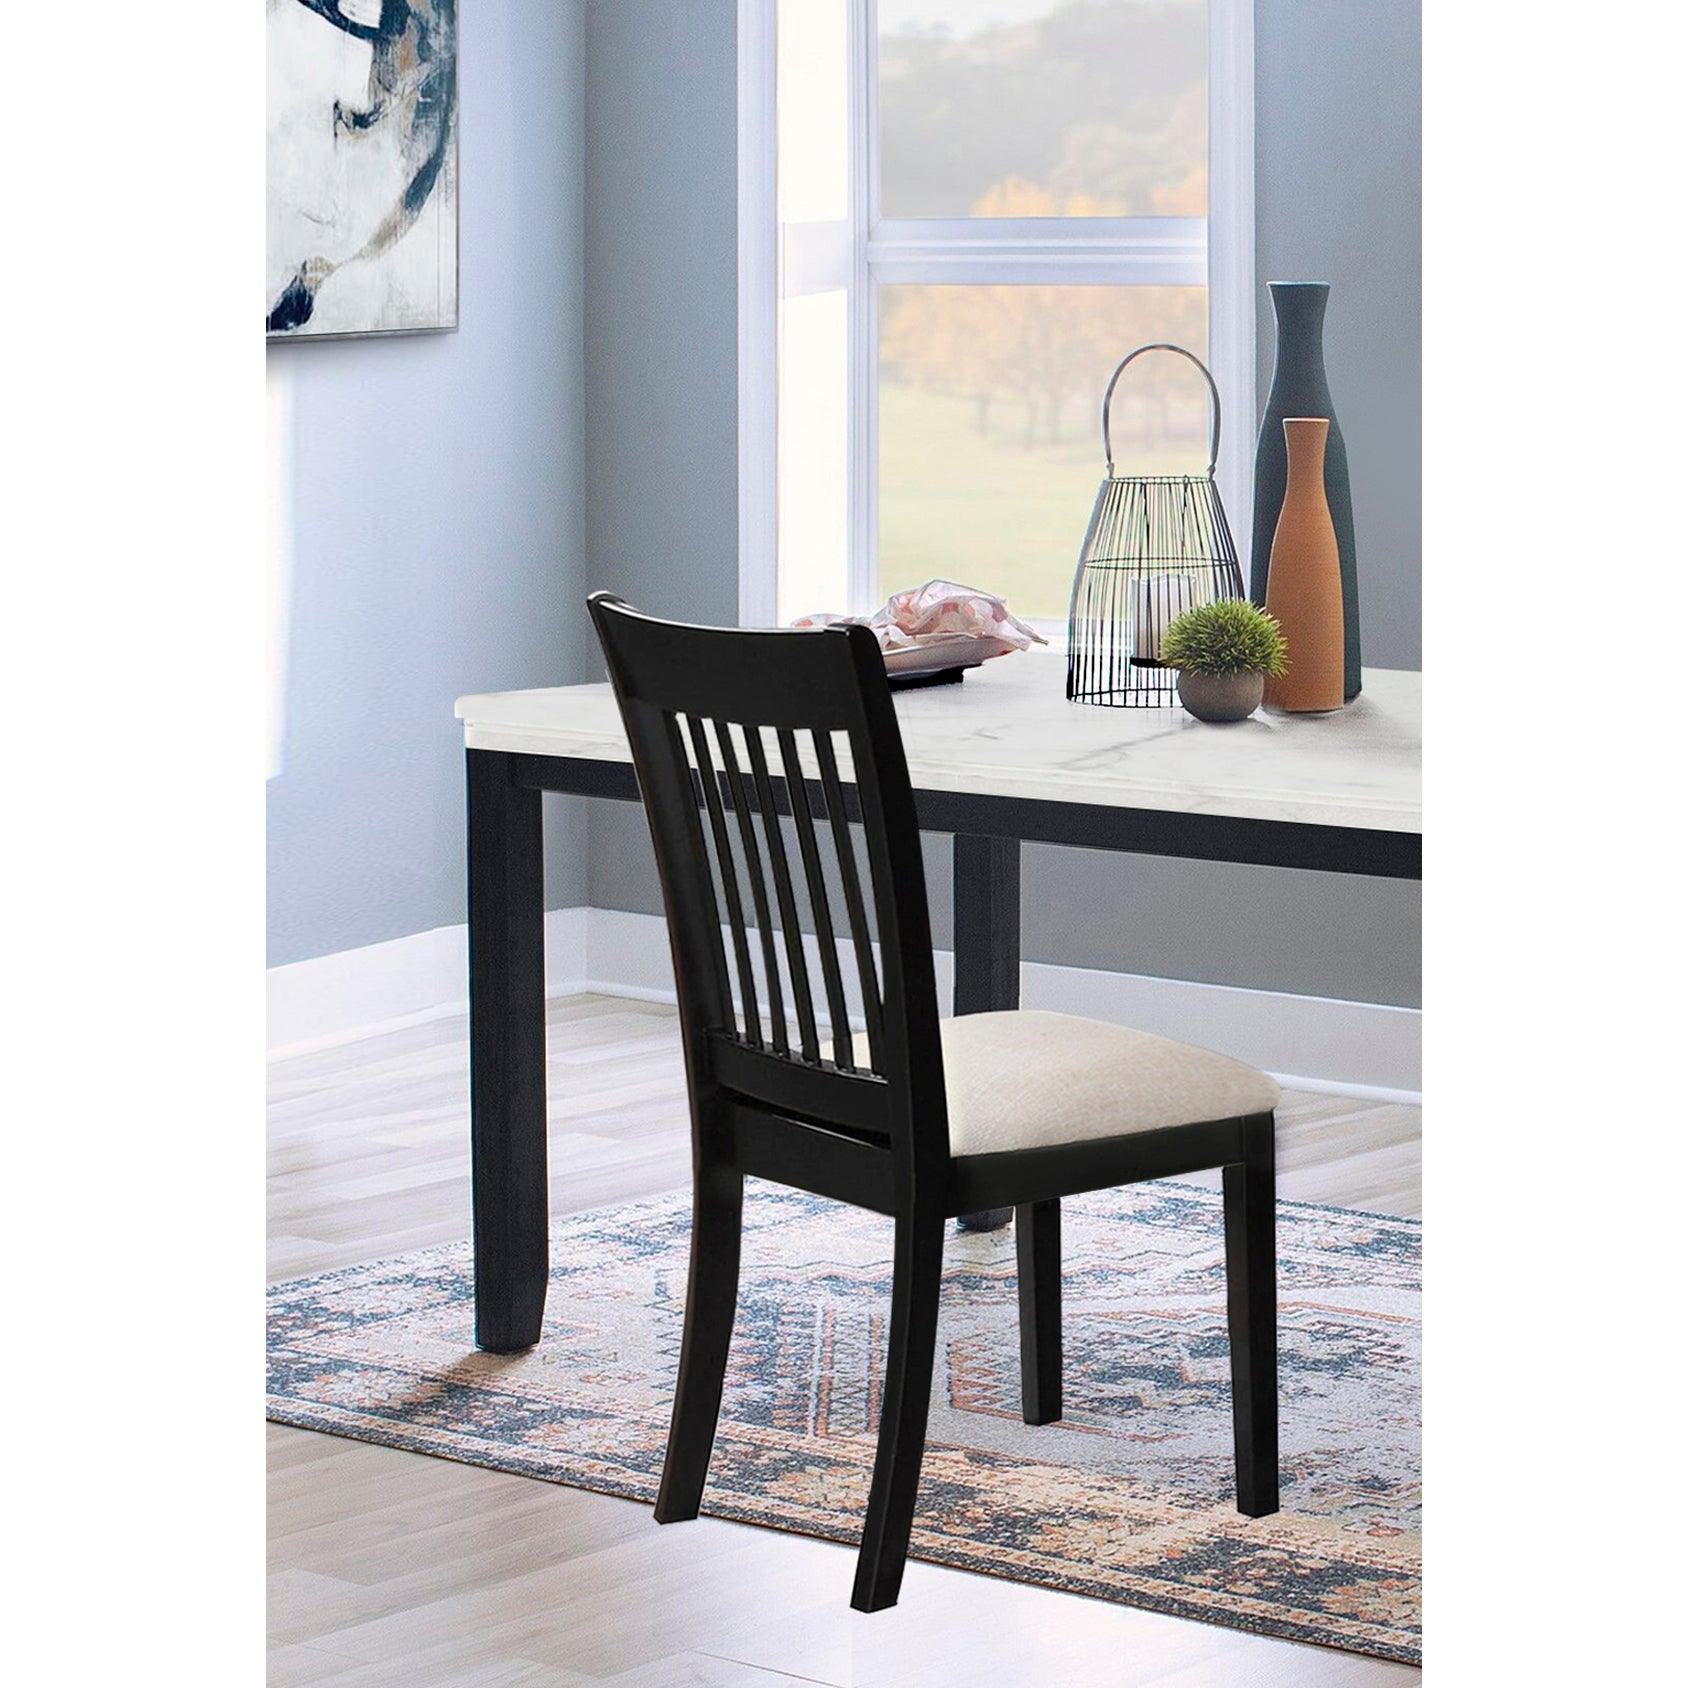 🆓🚛 Upholstered Seating Comfortable Black Dining Chairs Set Of 2 for Farmhouse, Kitchen